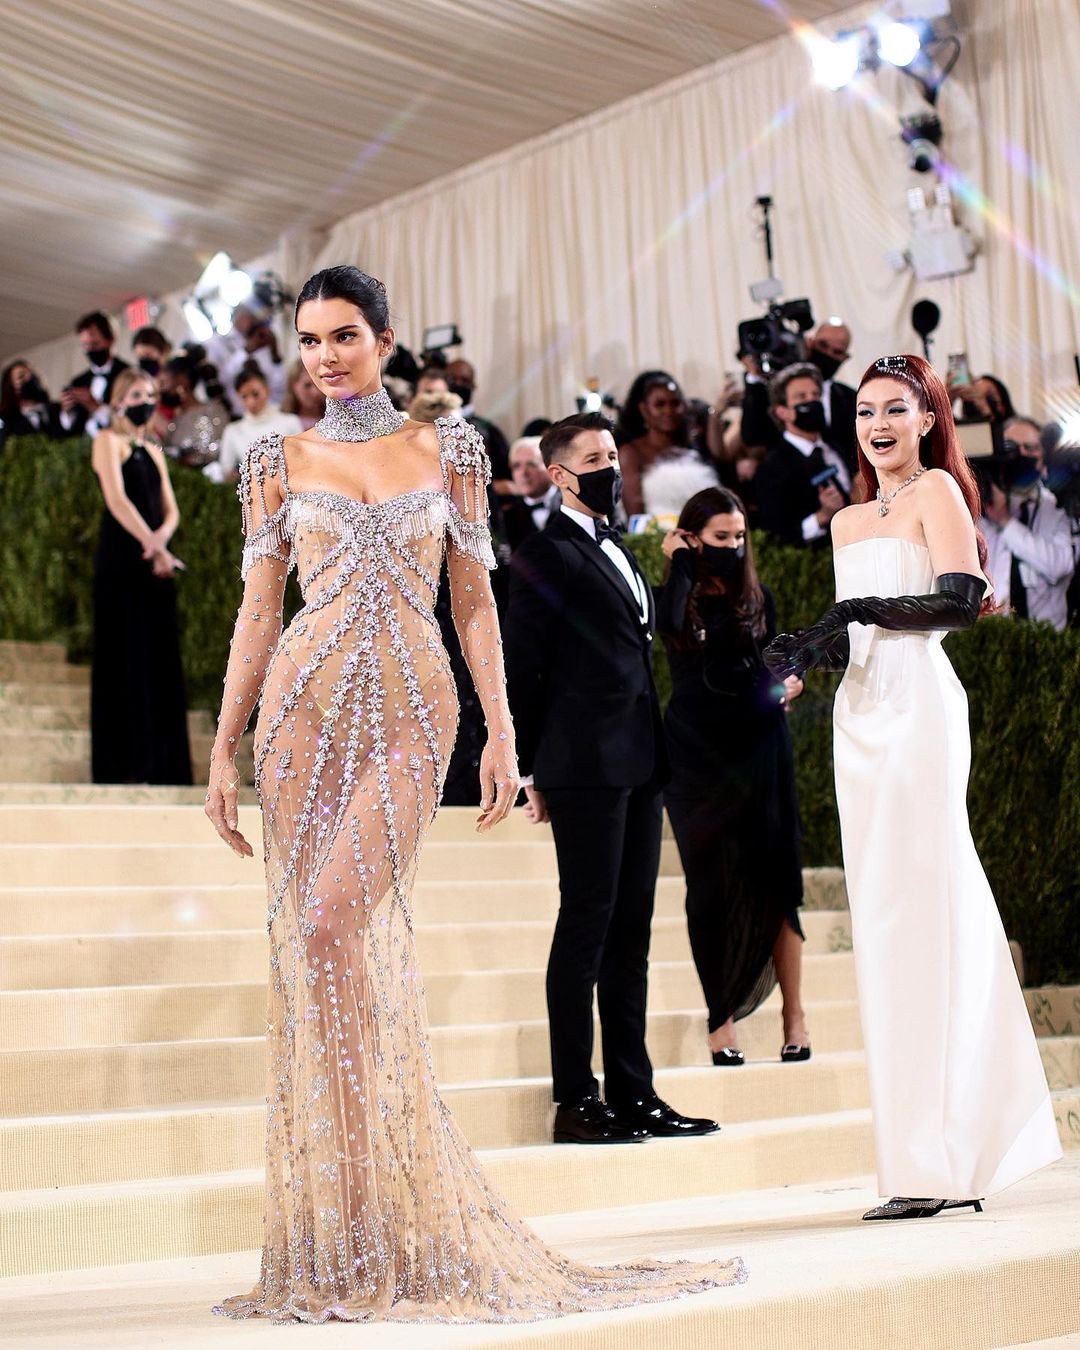 Met Gala 2021 Looks That Blew Us Away & Some Eco-Looks of the Night